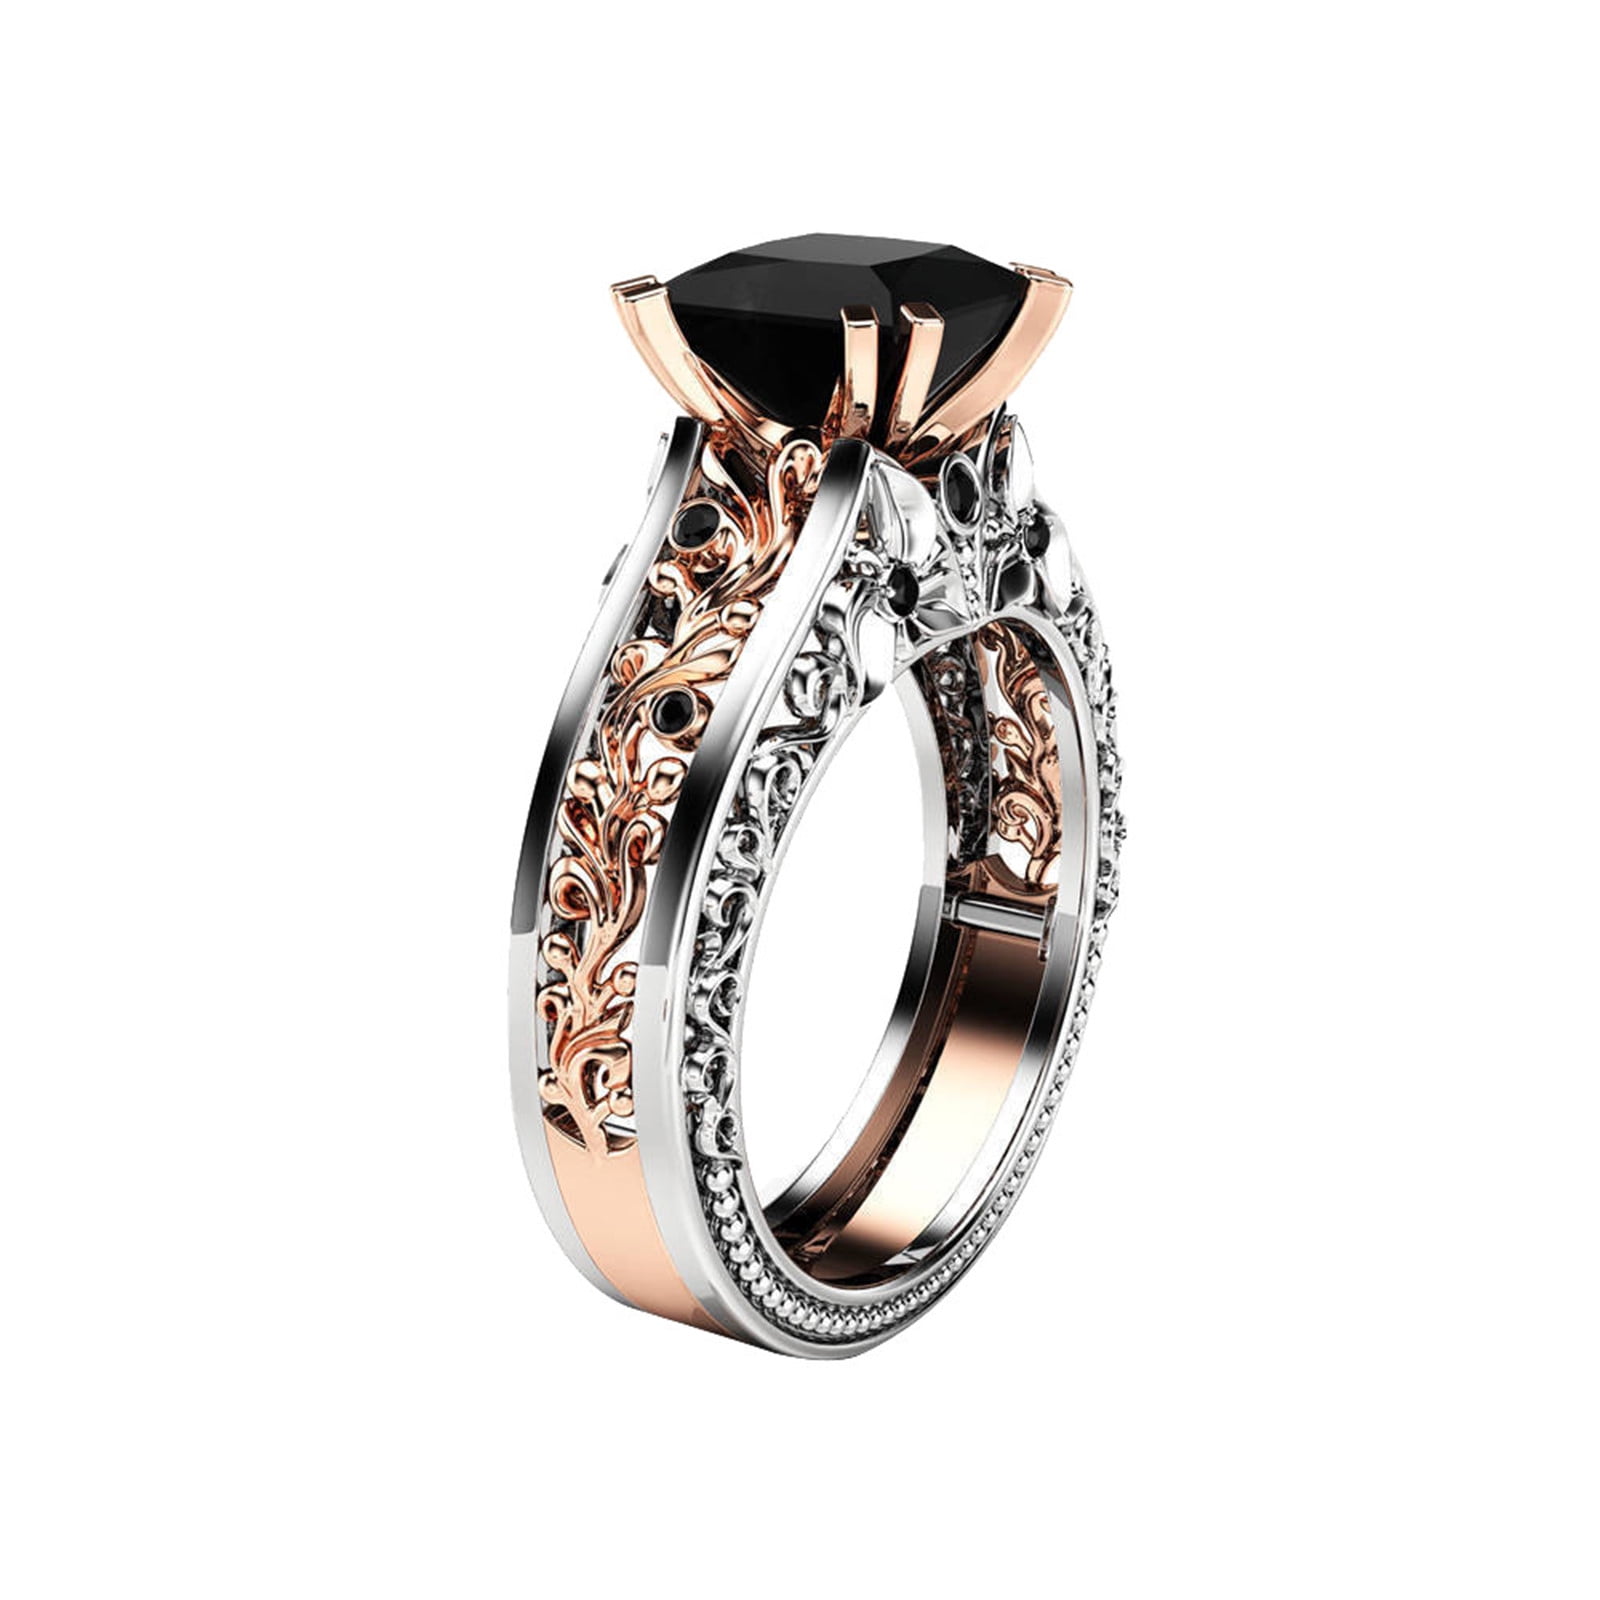 Brilliant-store fashion rings Simple Cross Twist Cubic Zirconia Lovers Rose Gold Color Wedding Ring Jewelry Full Sizes,9,Silver